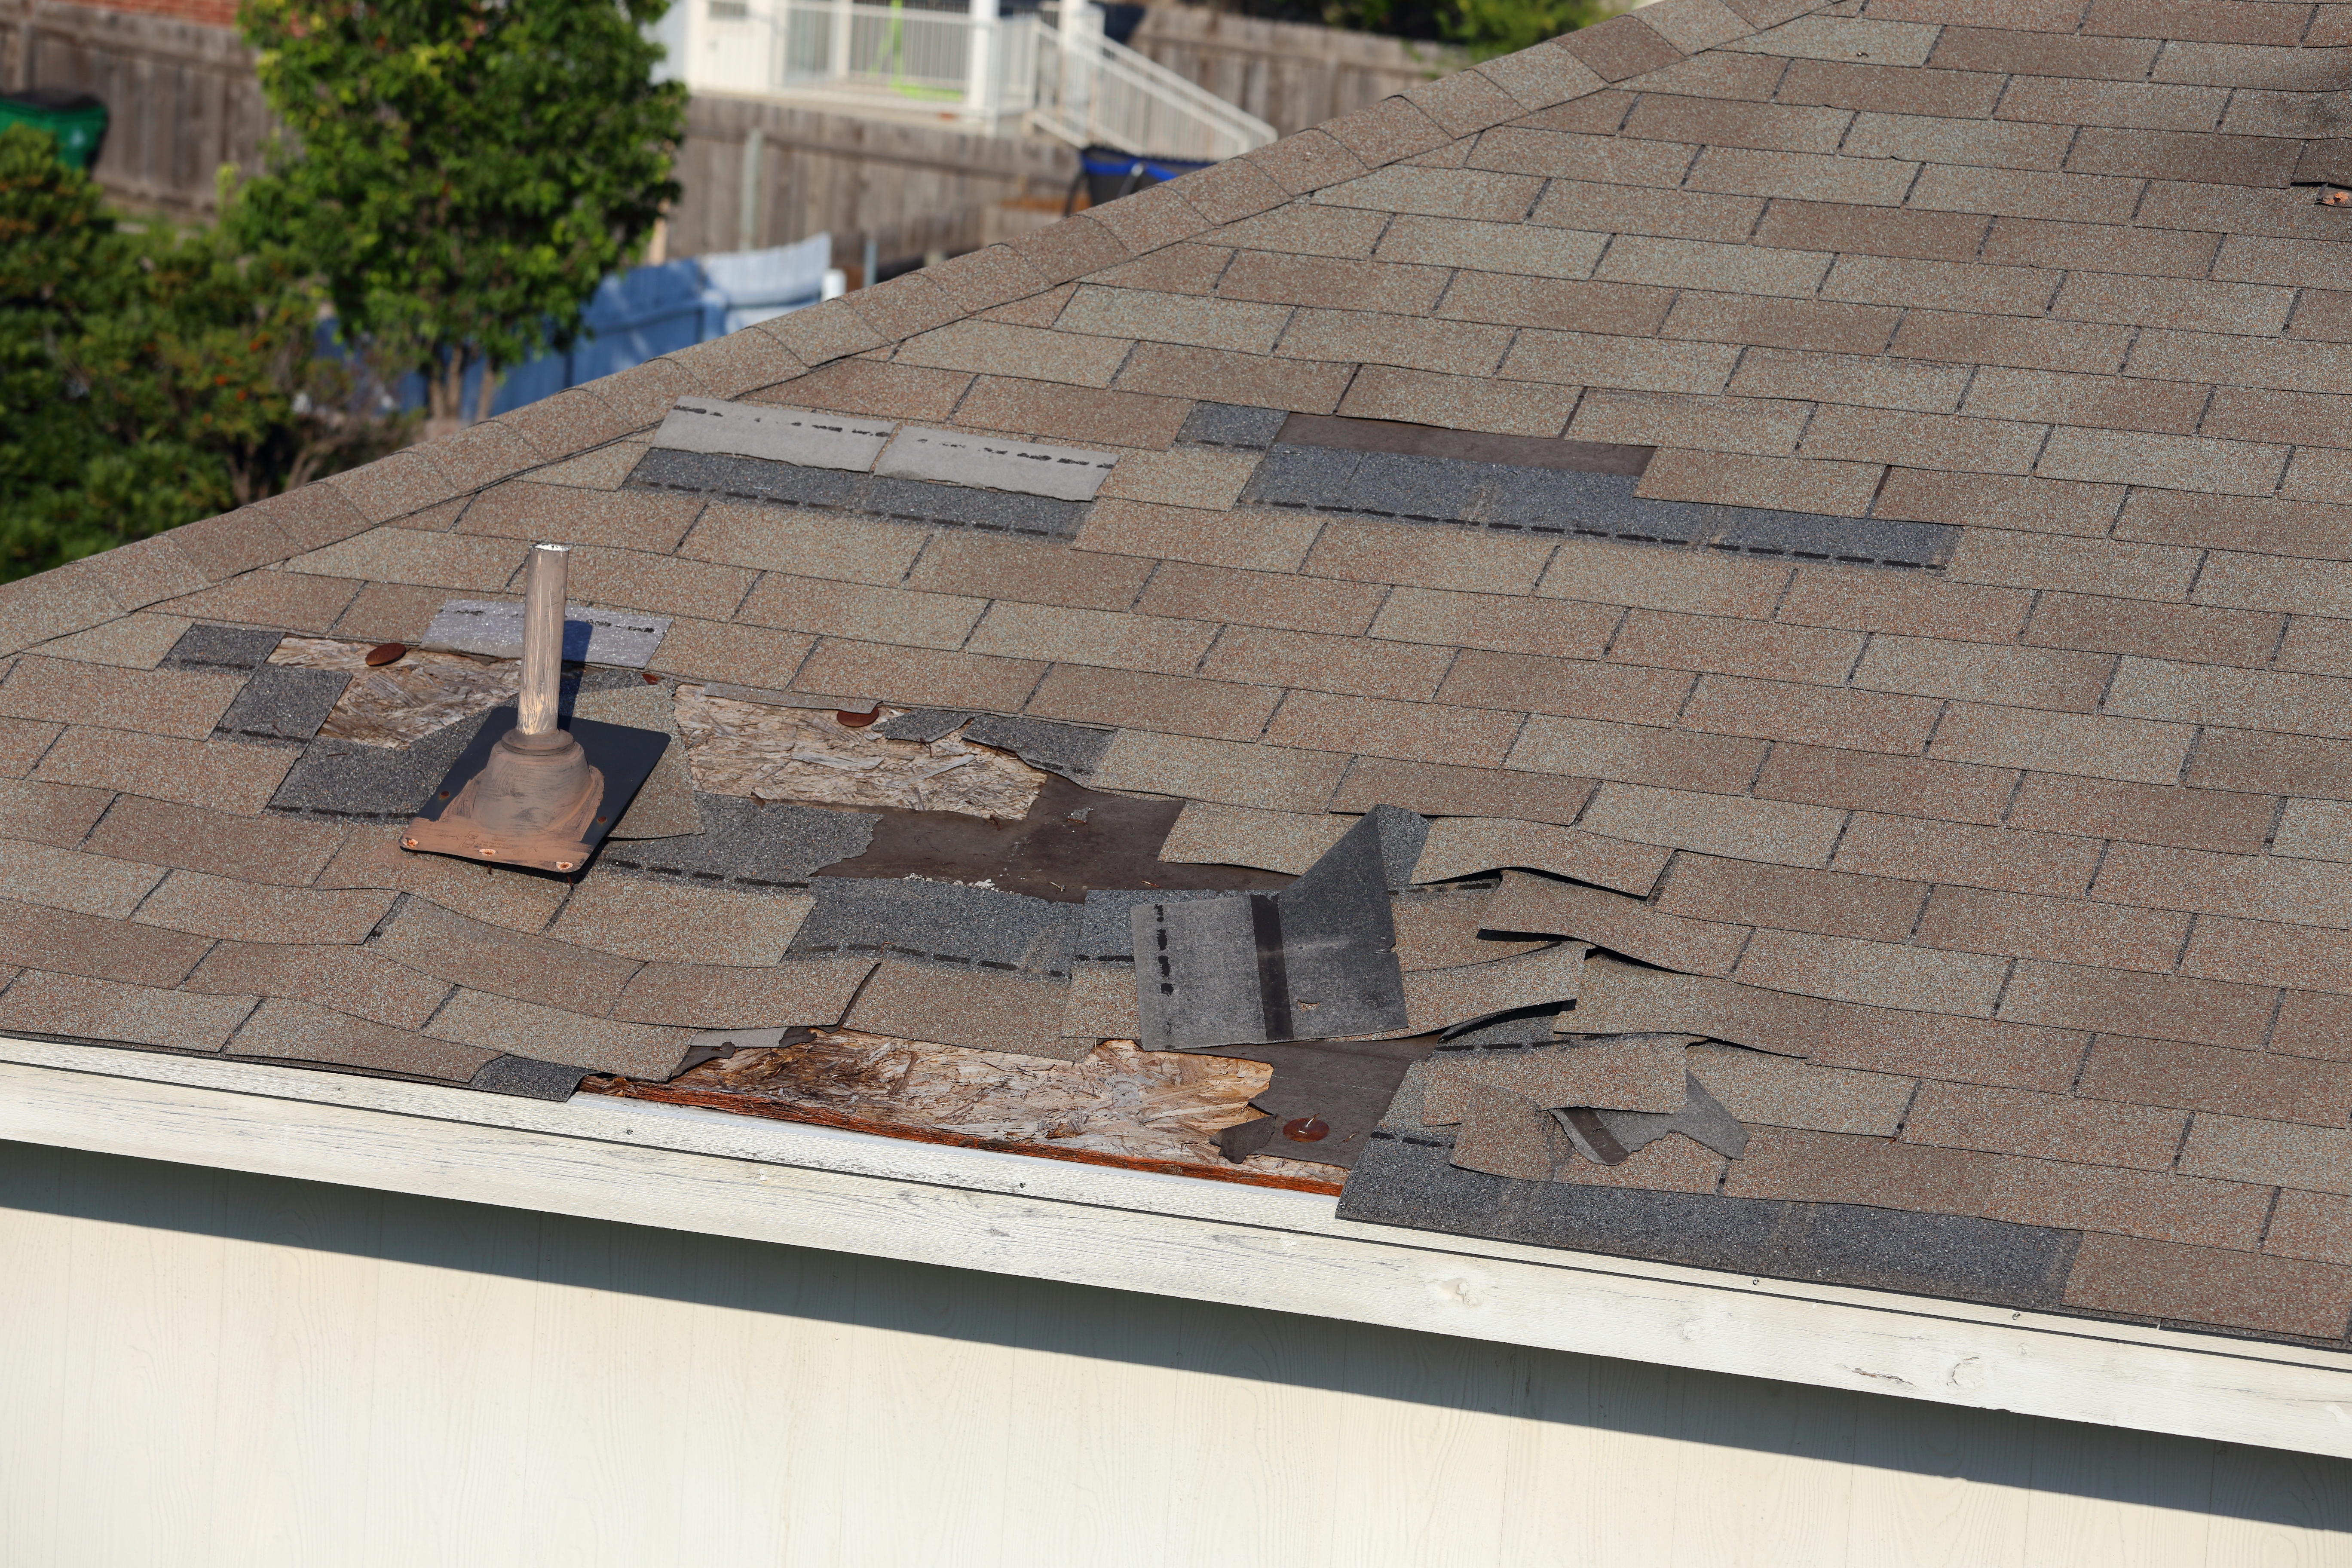 Cypress TX roof with missing and loosened shingles from wind damage